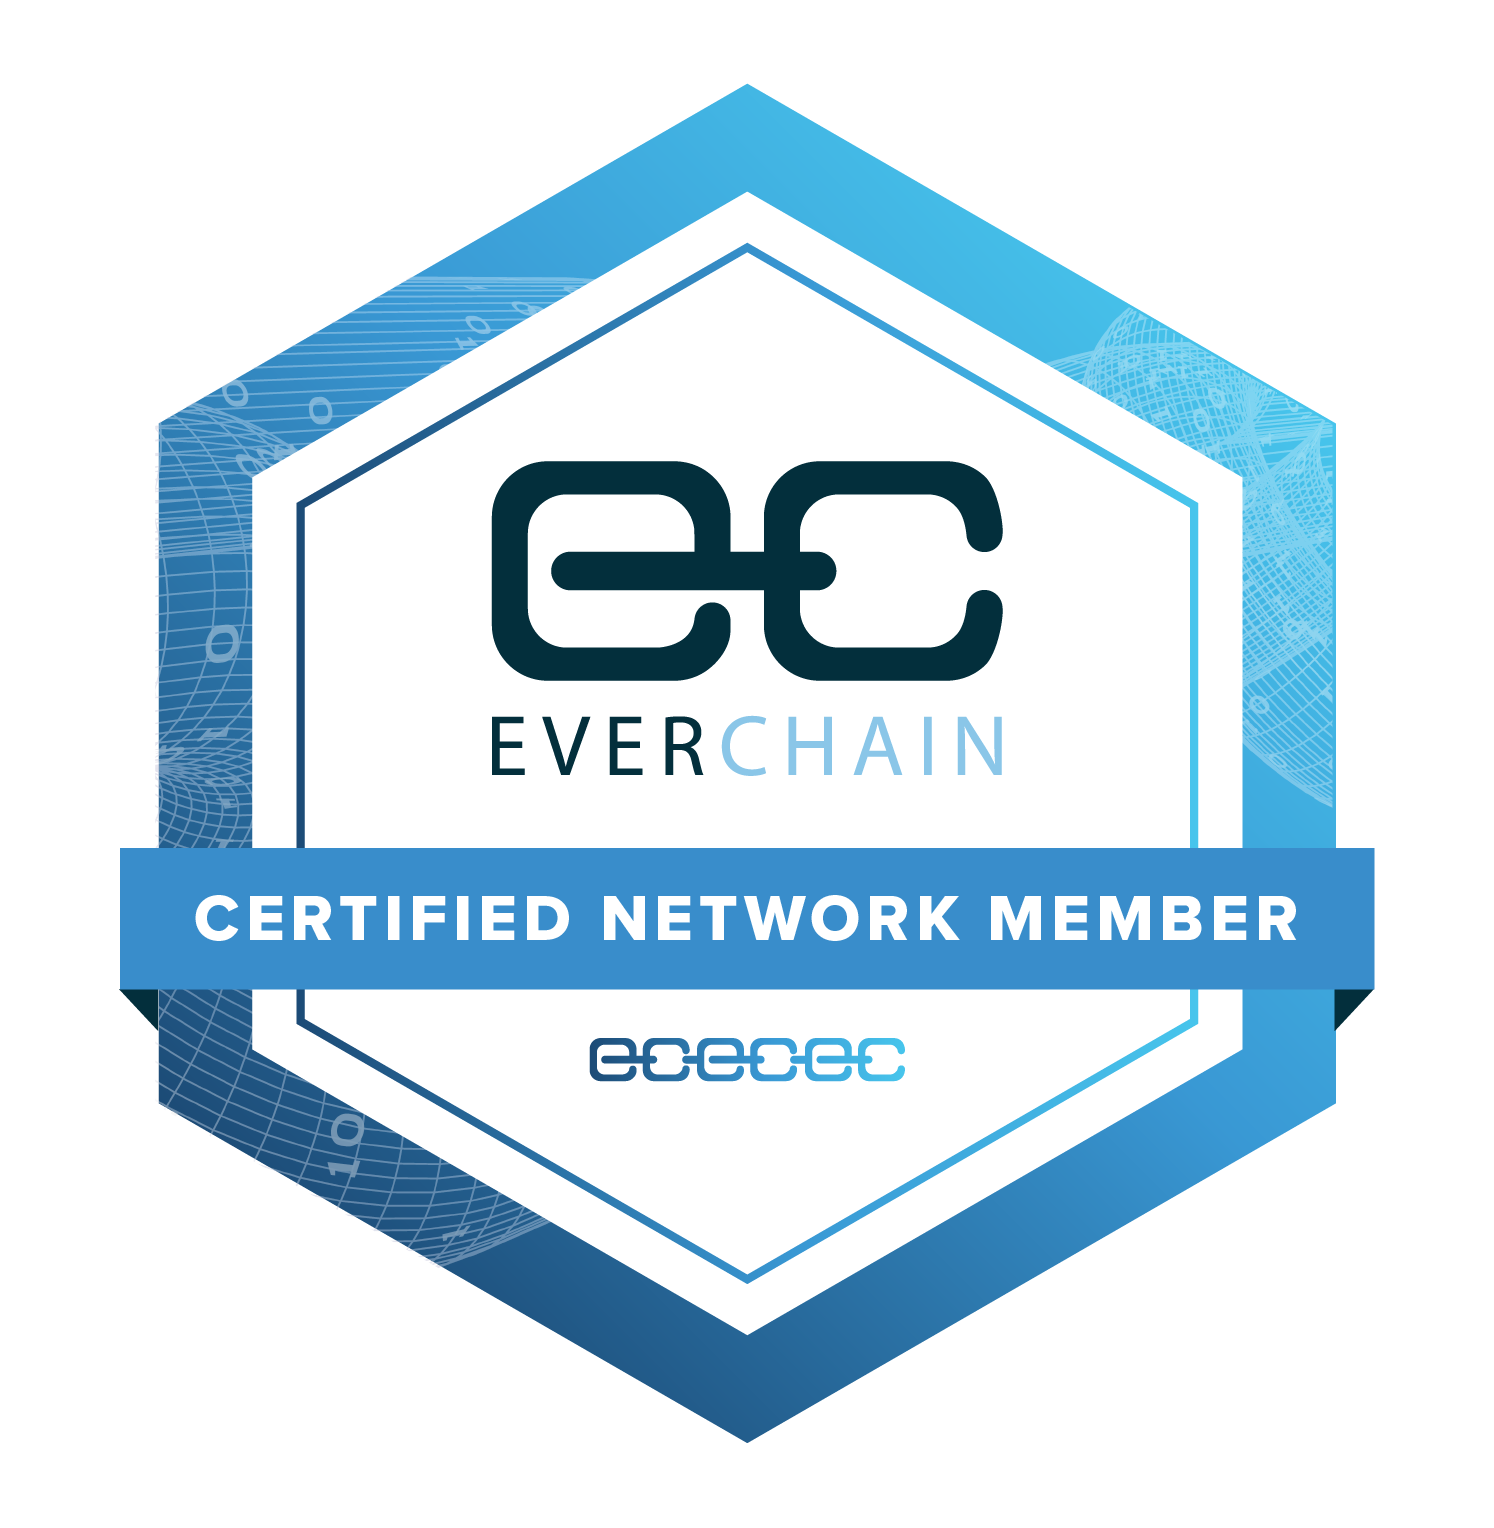 Allegiant Capital Recovery is an Everchain Certified Network Member